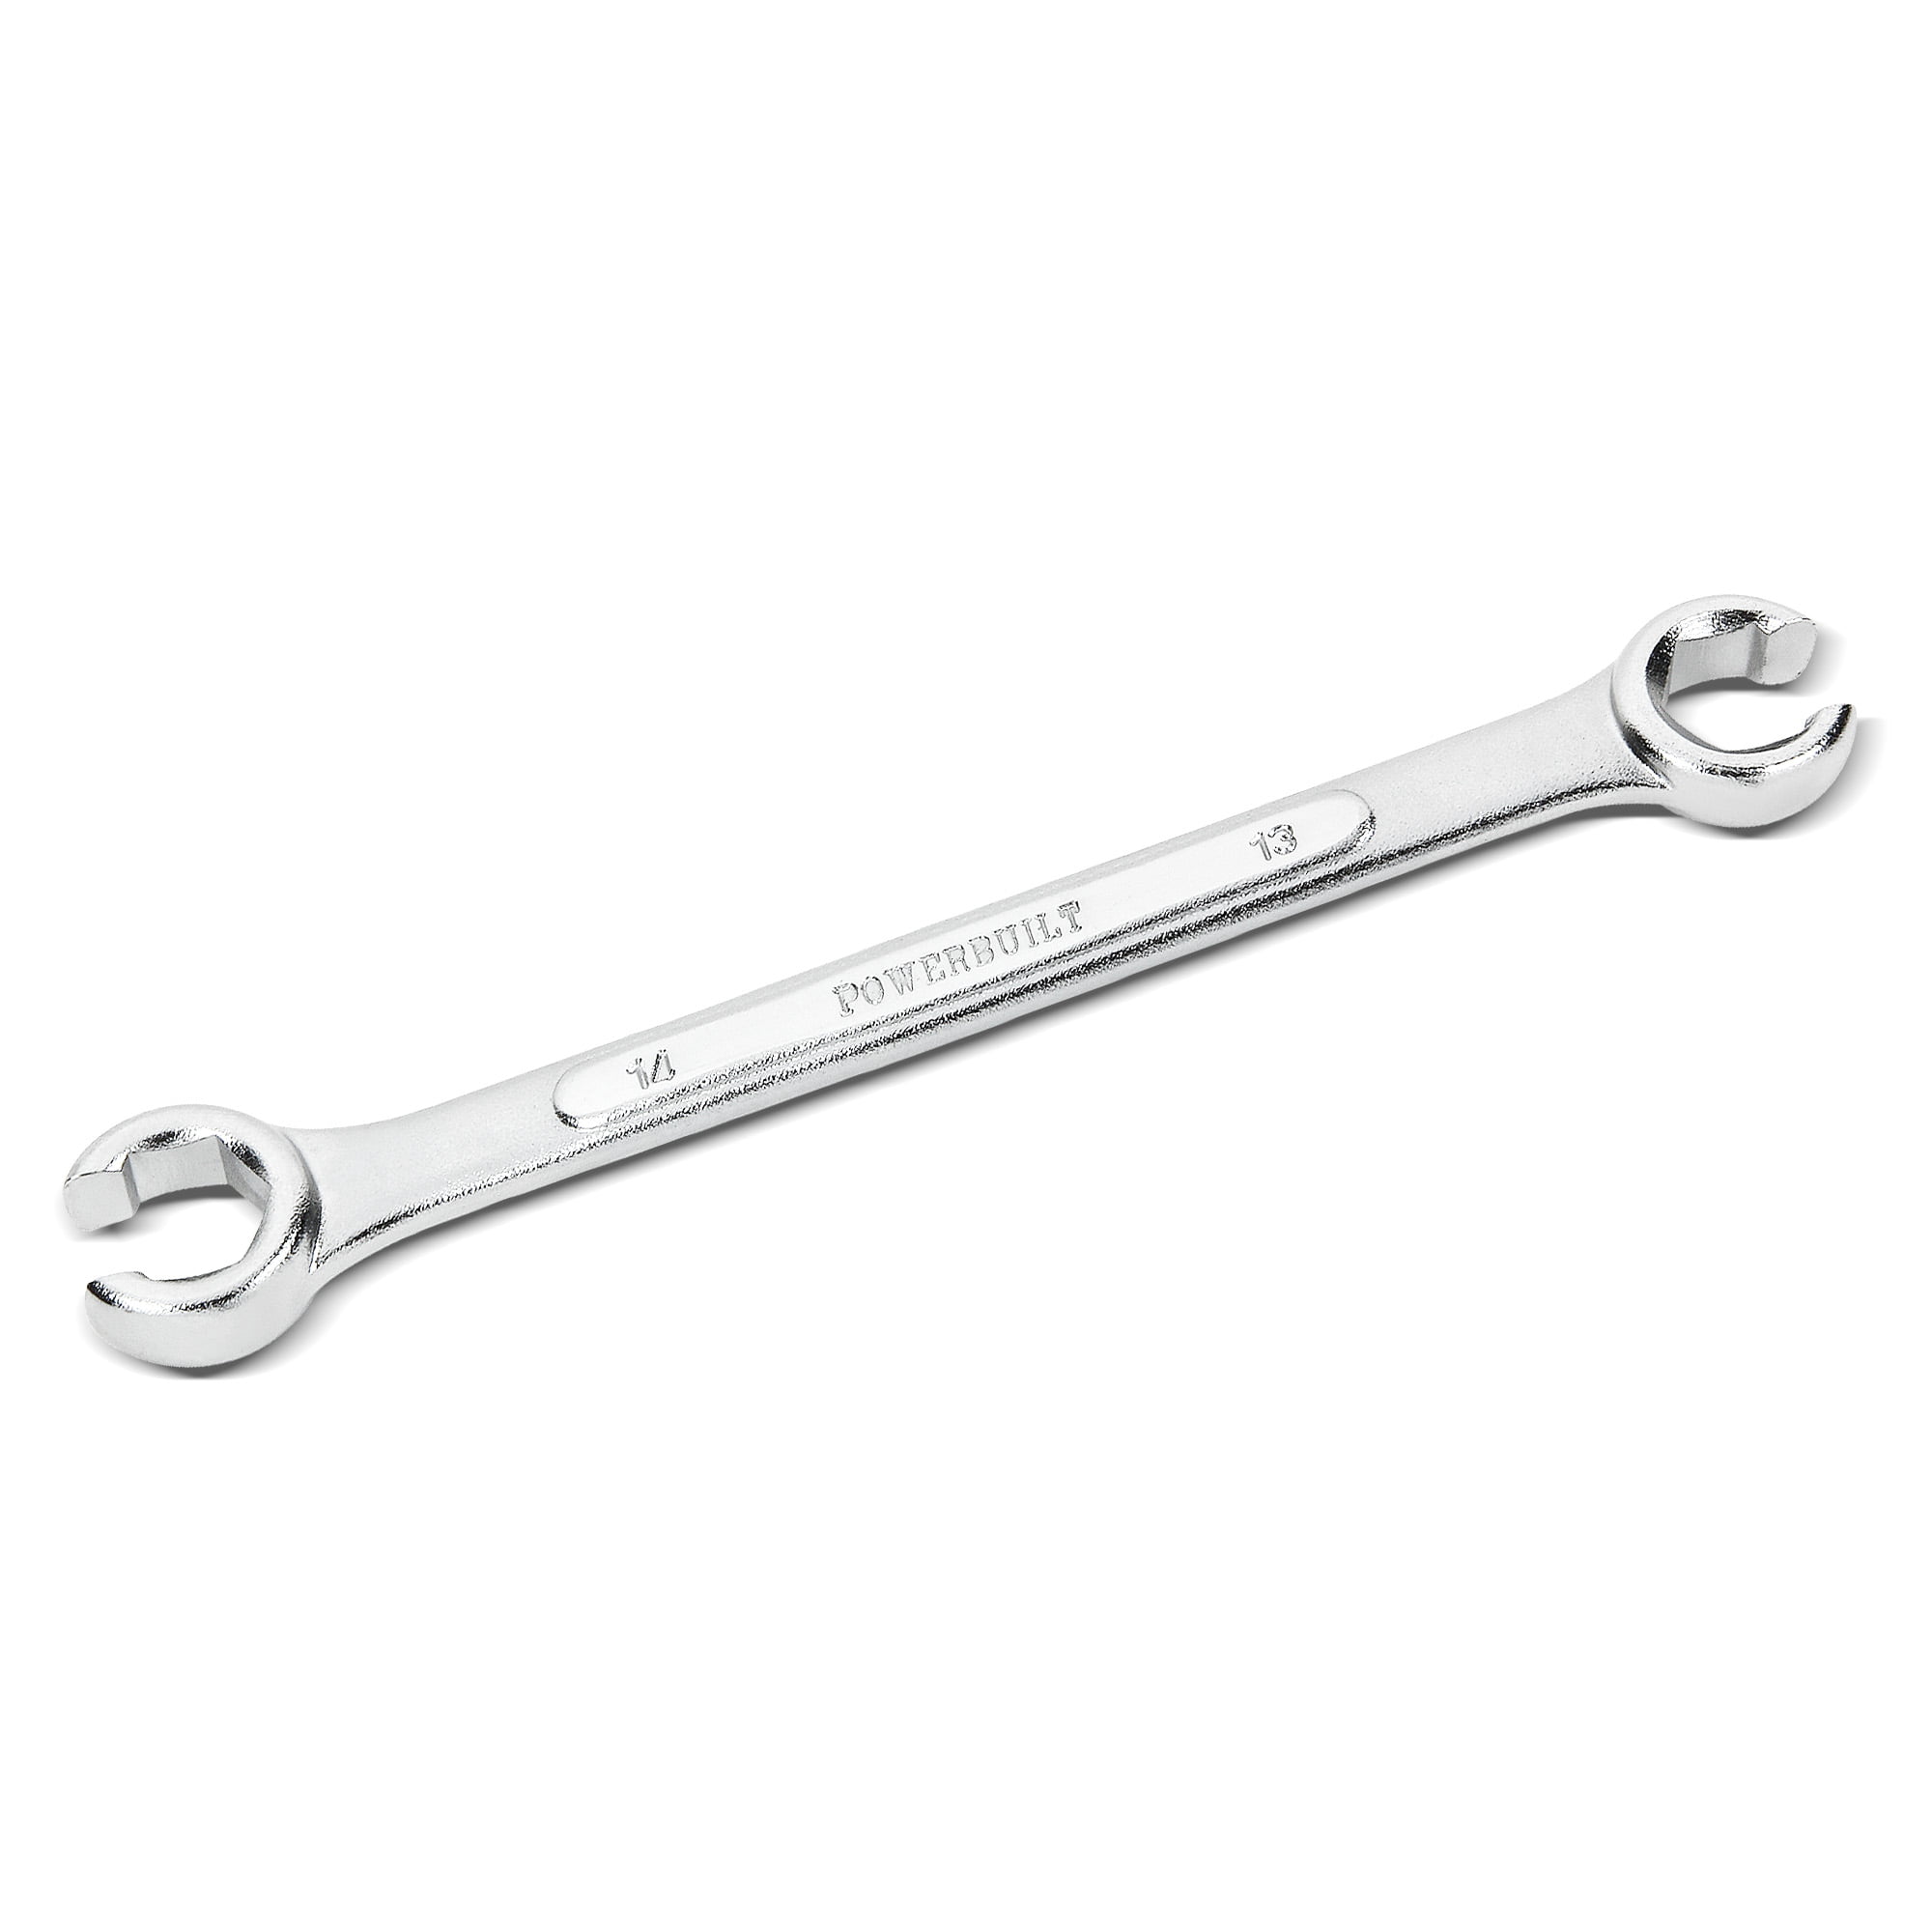 Double-End Metric Flare Nut Wrench Set of 3 wrenches 6 Sizes: 10 mm to 17 mm 